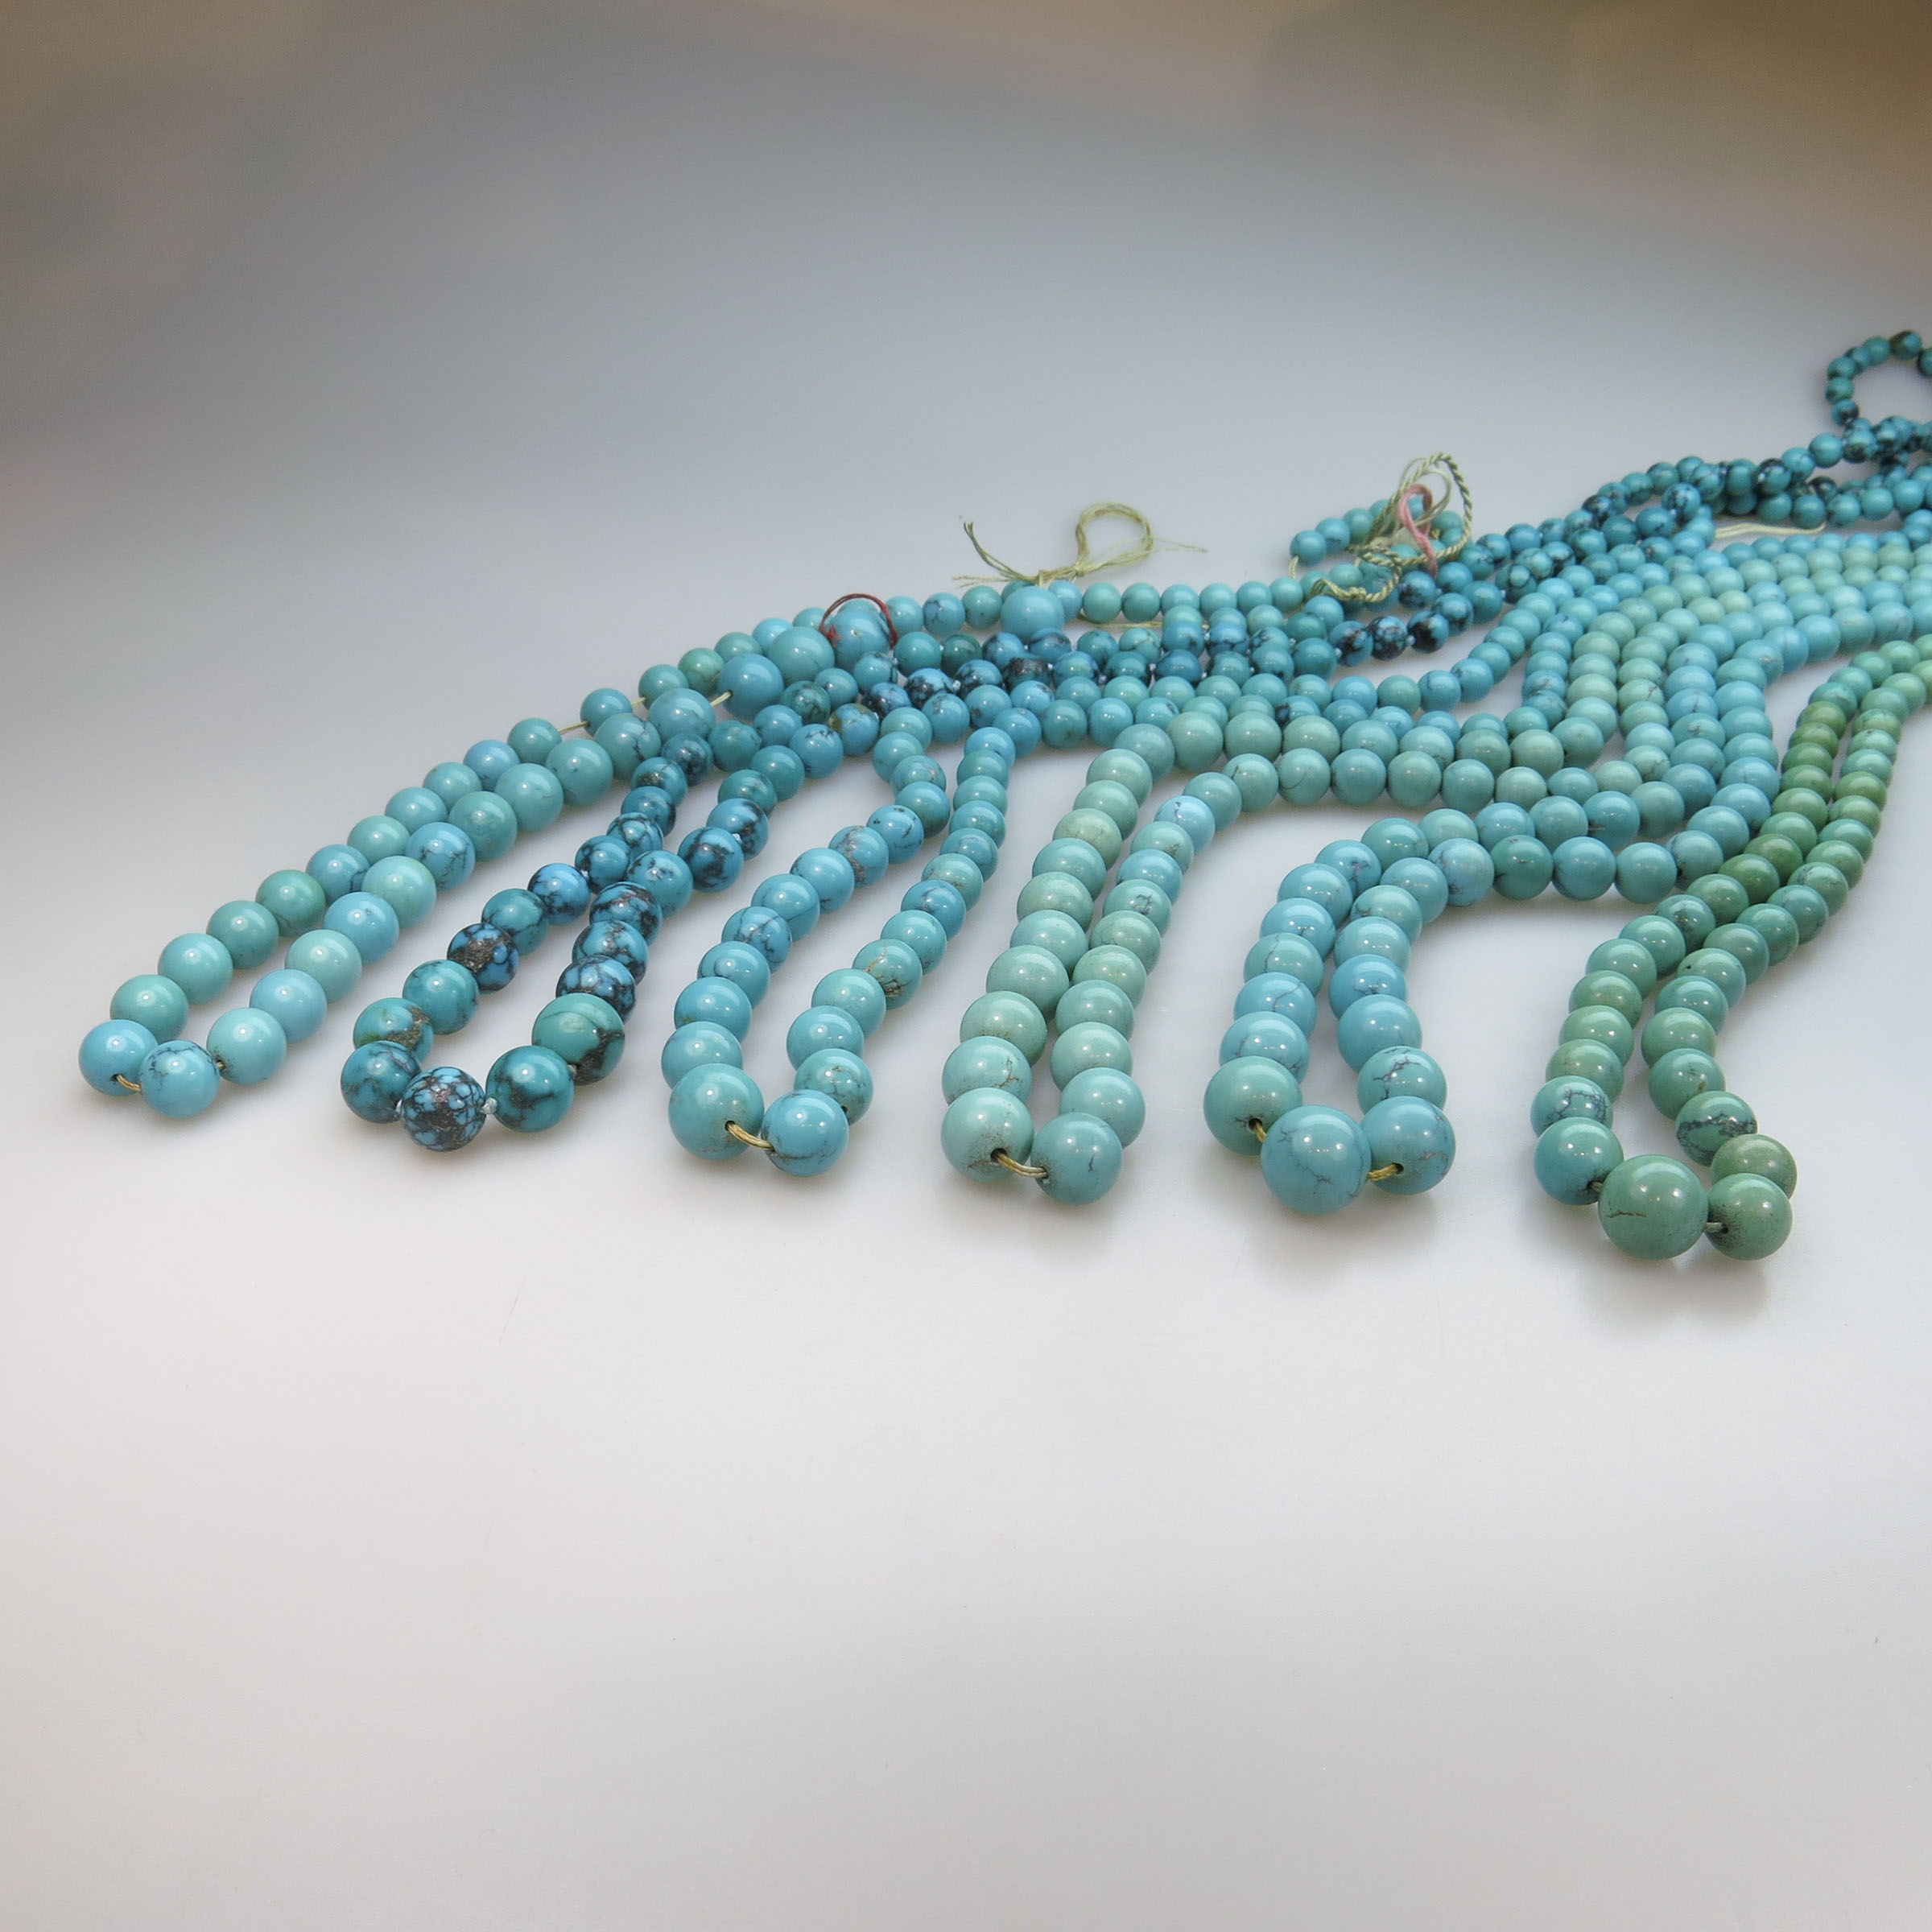 6 Graduated Strands Of Turquoise Beads